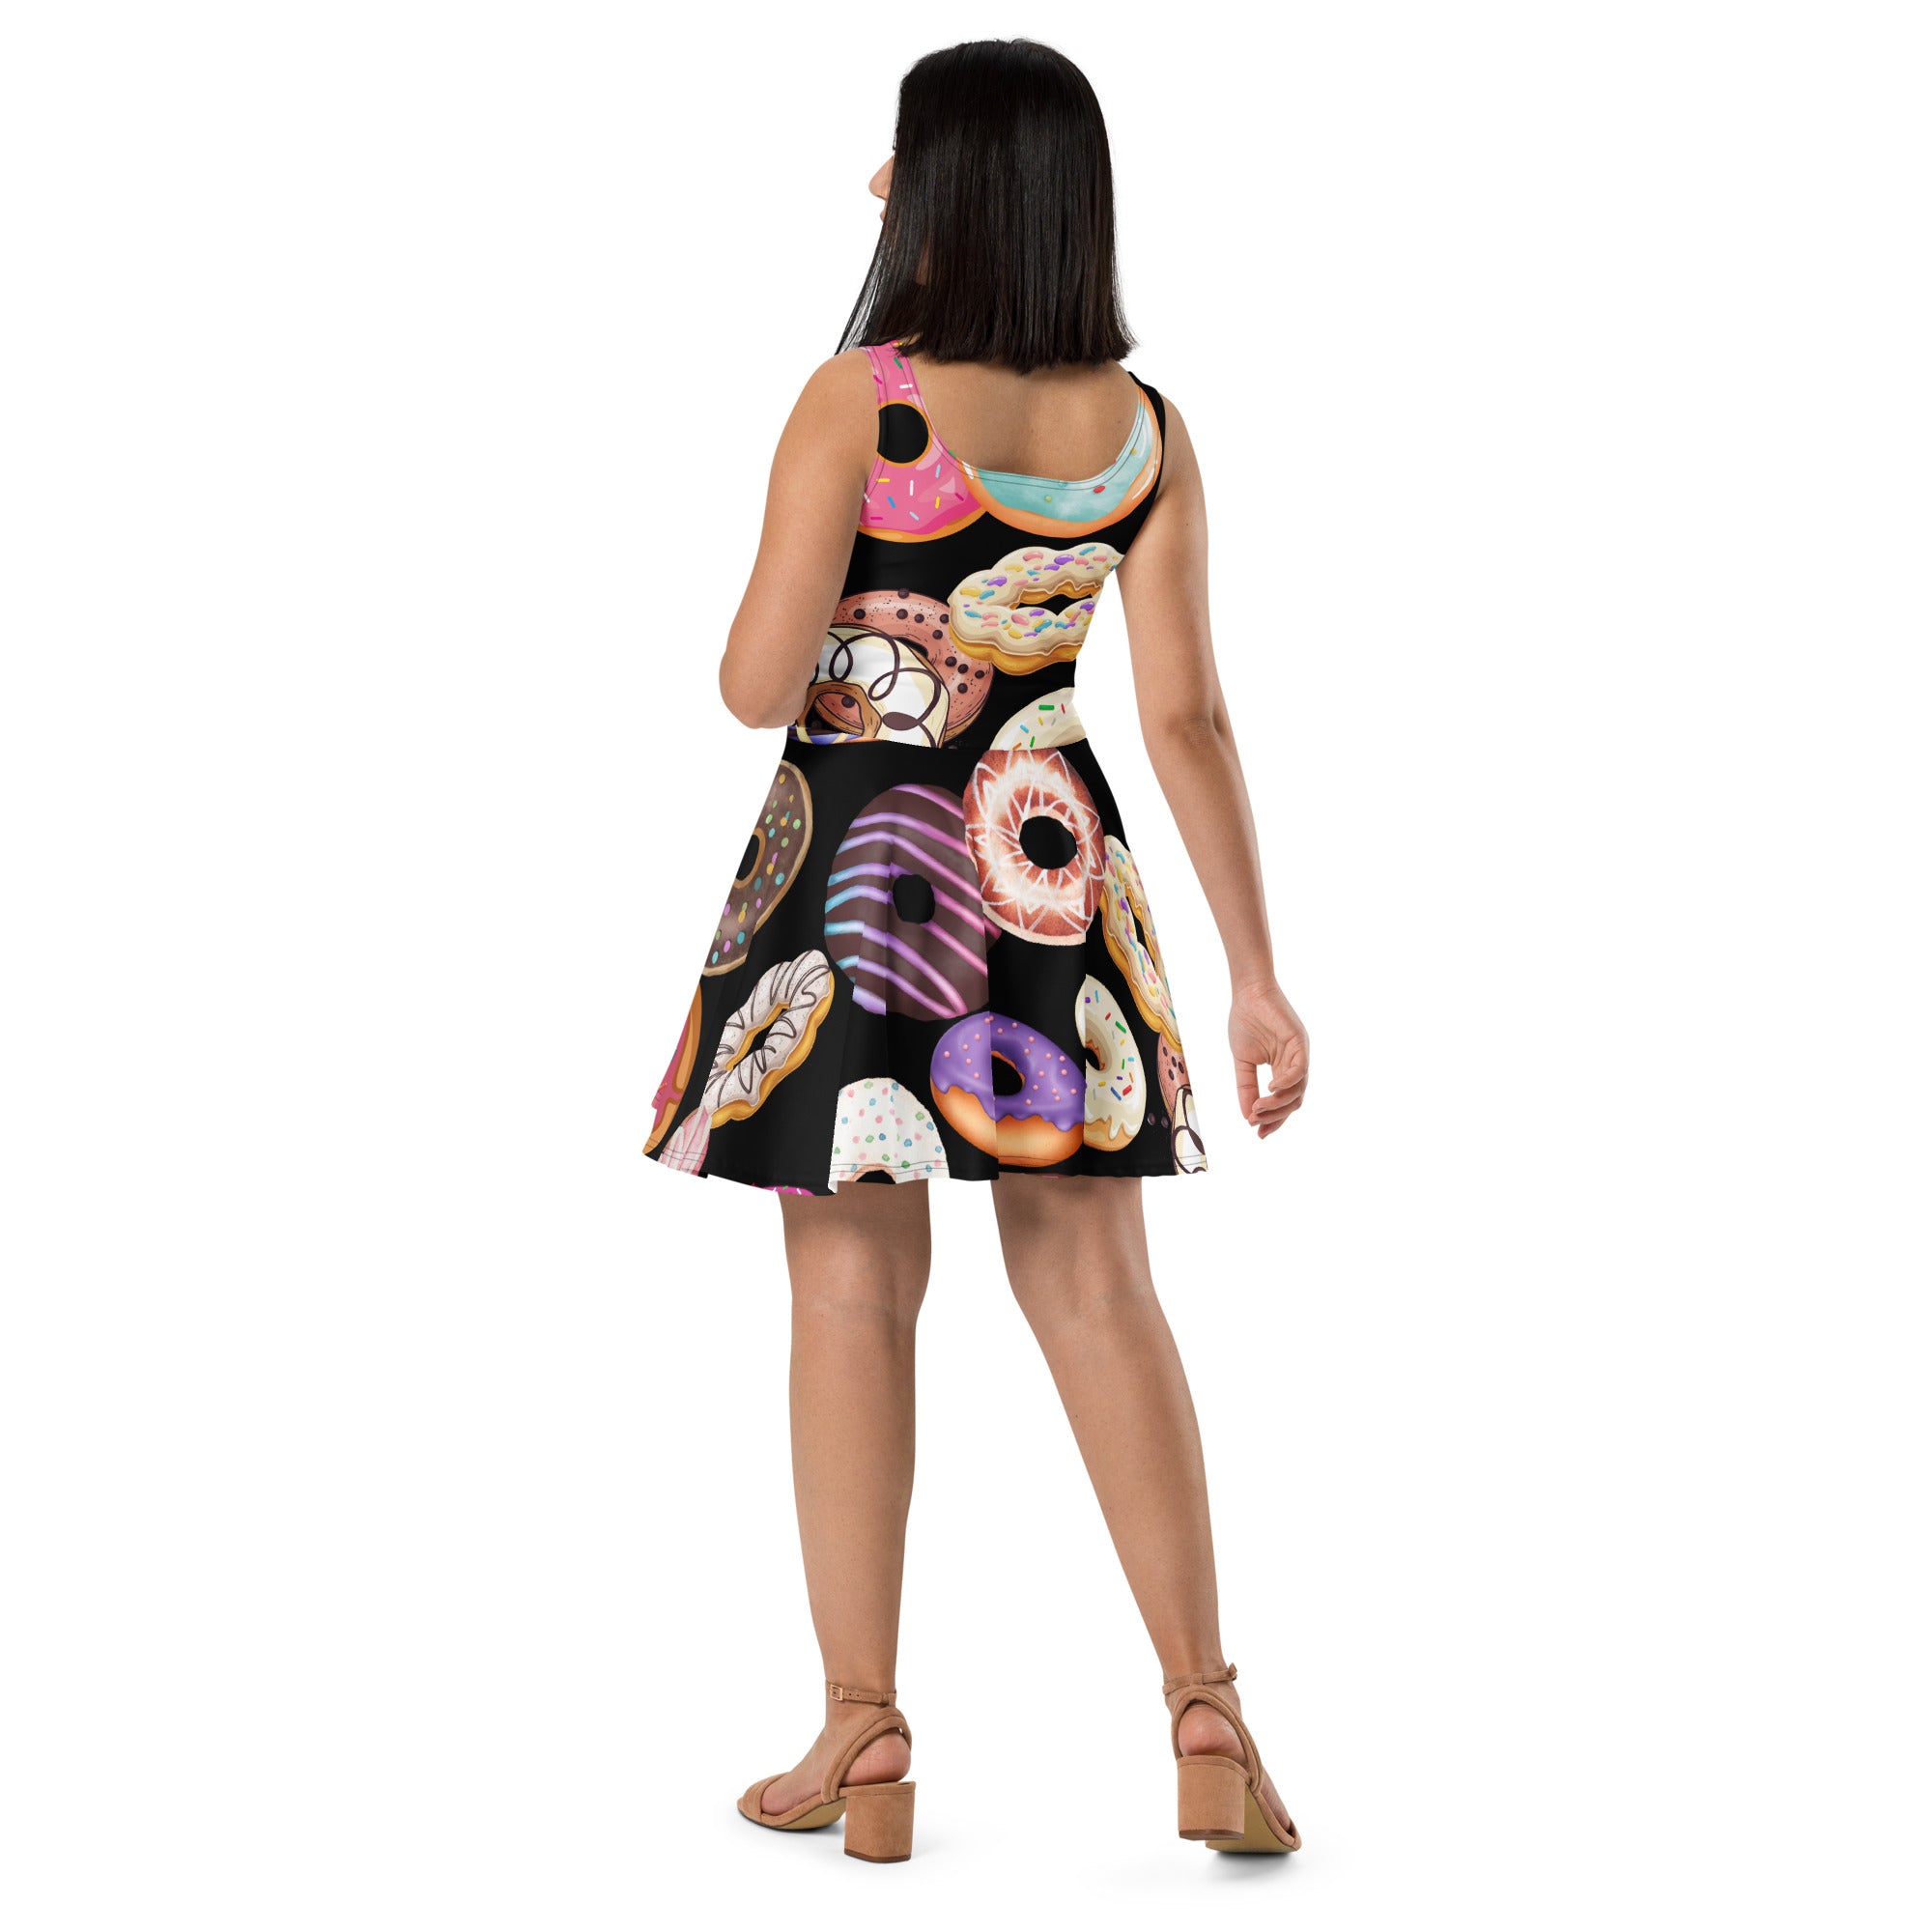 "Sweet Delights: Cute Donuts Skater Dress", lioness-love